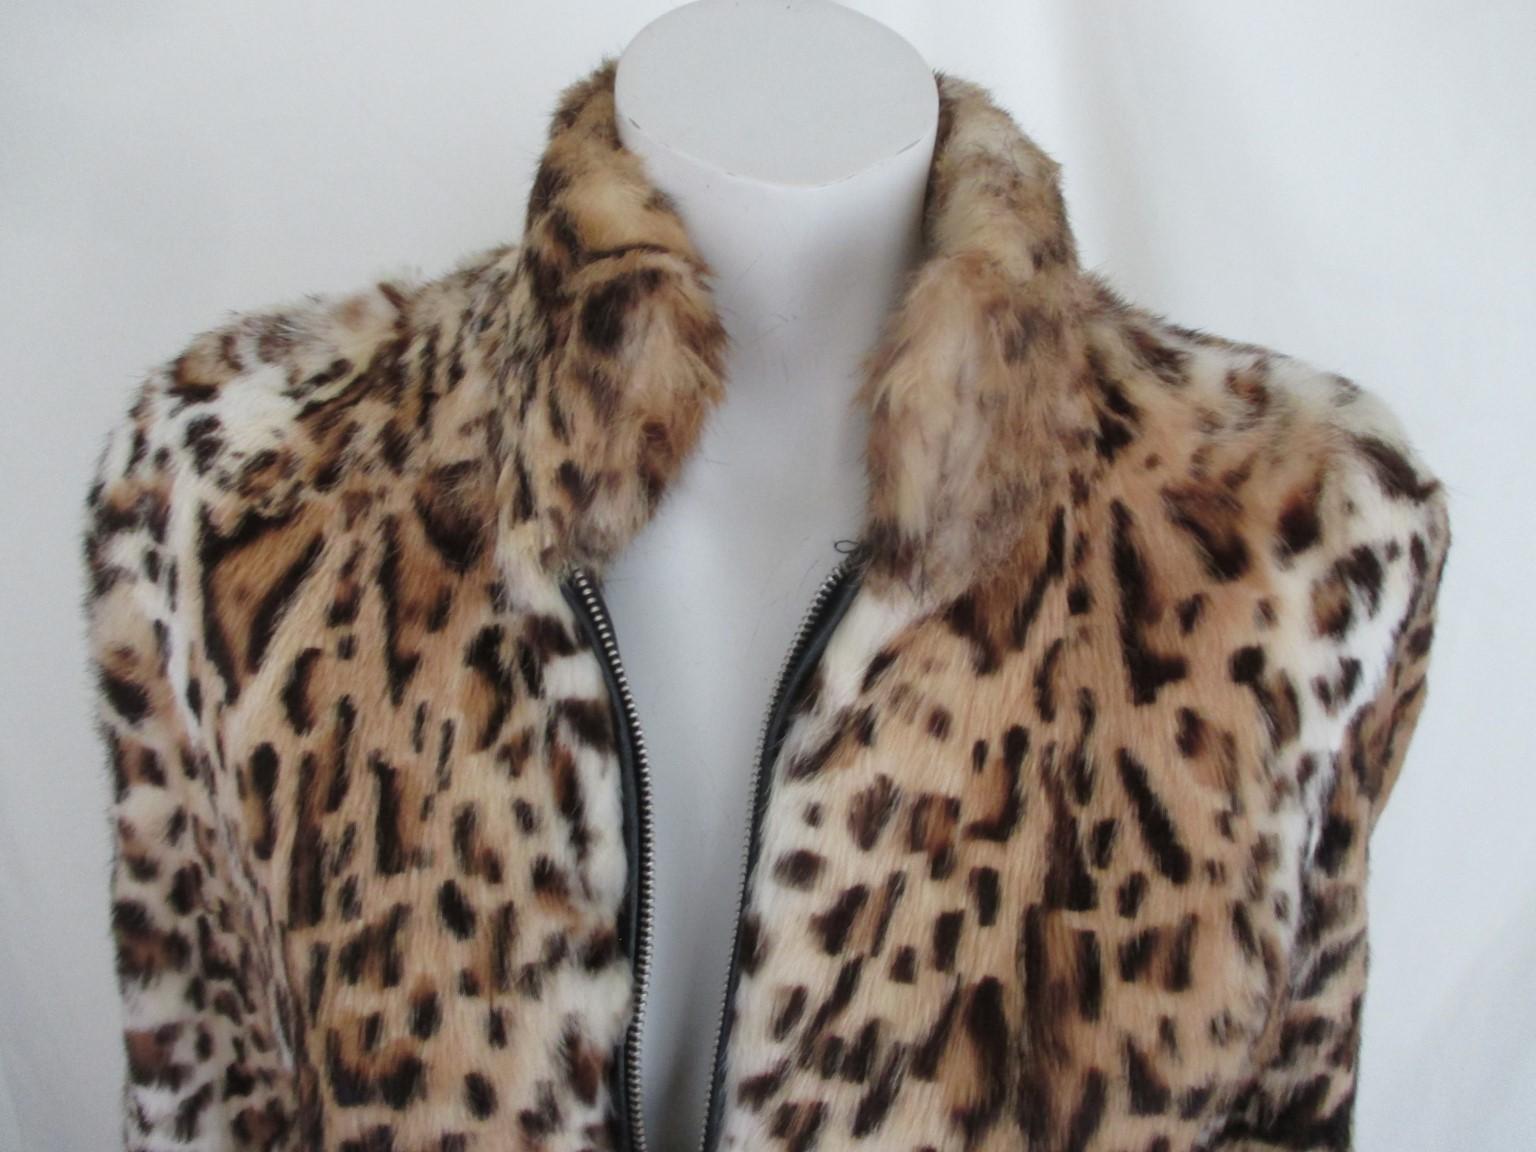 Panther printed Leopard Lapin vintage fur jacket

We offer more exclusive fur & vintage couture items, view our front store

Details:
2 zipper pockets, closing zipper, fully lined
Soft fur and very light to wear
Size is aprox. medium please check